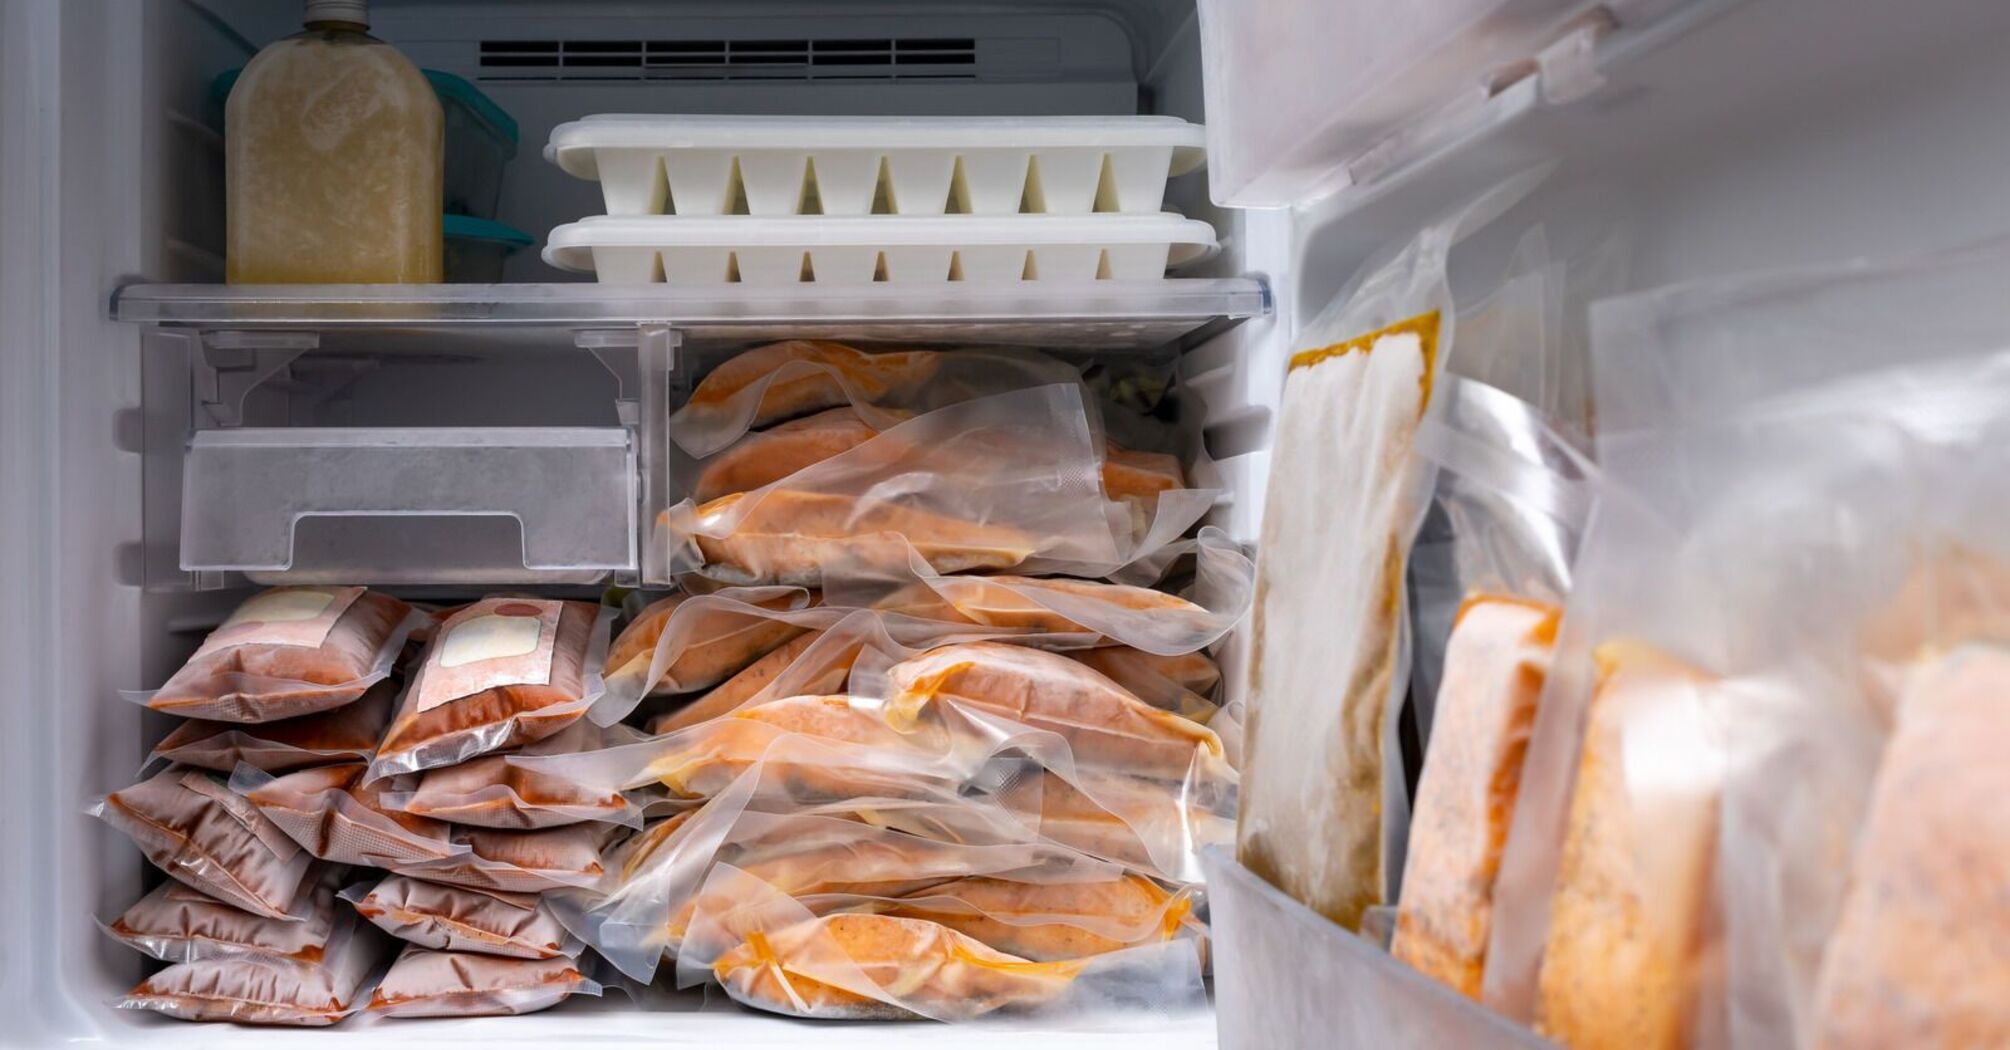 5 common mistakes to avoid when freezing food